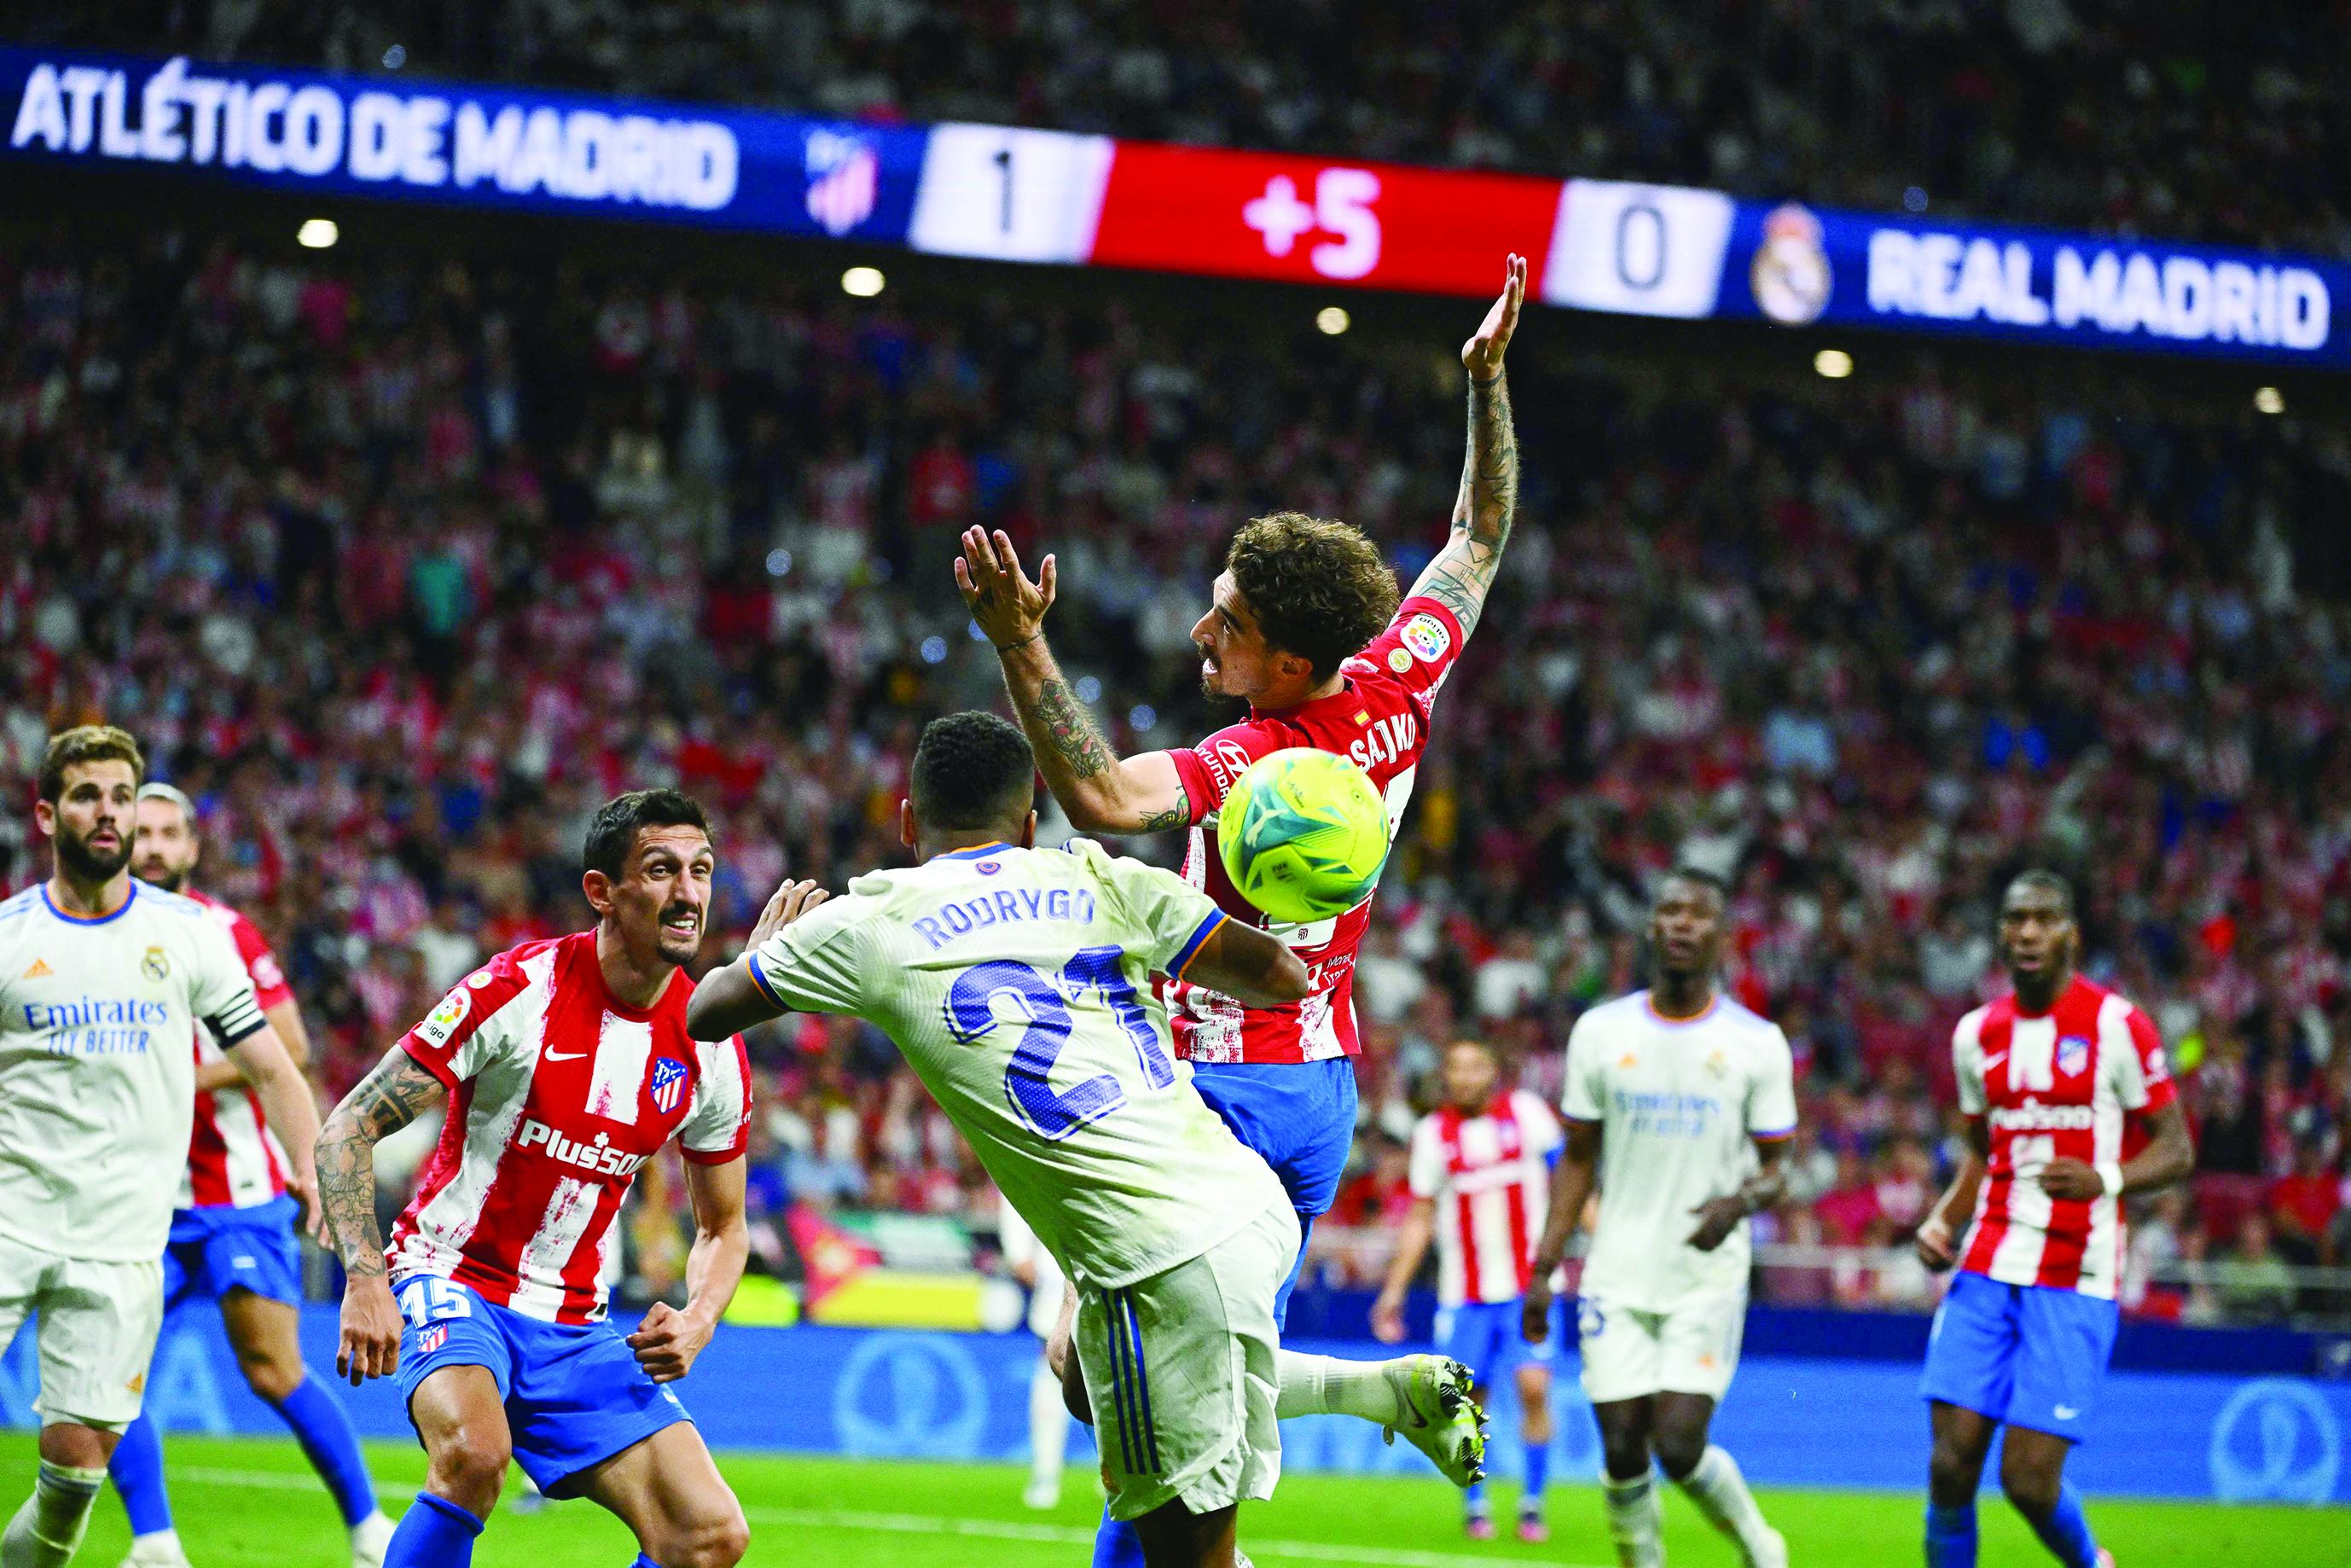 Real Madrid's Brazilian forward Rodrygo (L) fights for the ball with Atletico Madrid's Croatian defender Sime Vrsaljko during the Spanish League football between Club Atletico de Madrid and Real Madrid CF at the Wanda Metropolitano stadium in Madrid on May 8, 2022. (Photo by GABRIEL BOUYS / AFP)